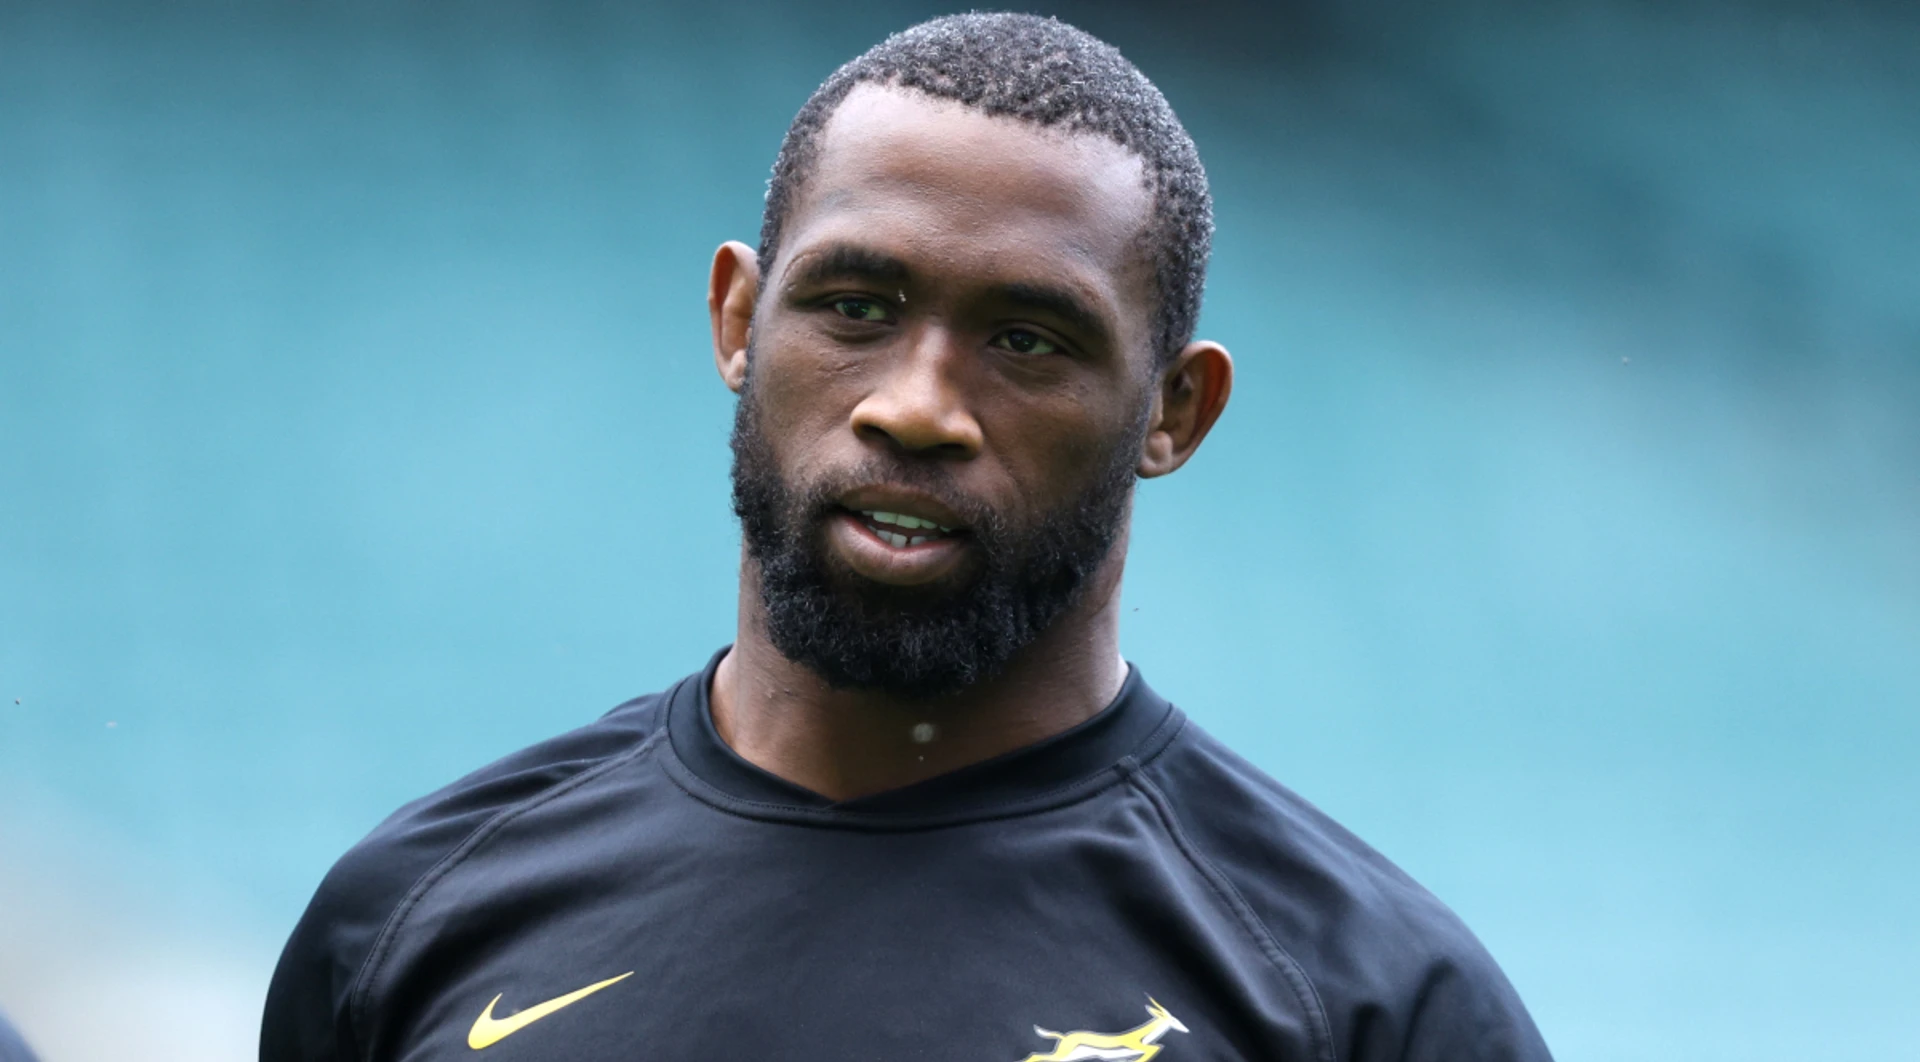 BOK CAPTAIN: Siya is not fat, not transparent, he is captain - Rassie